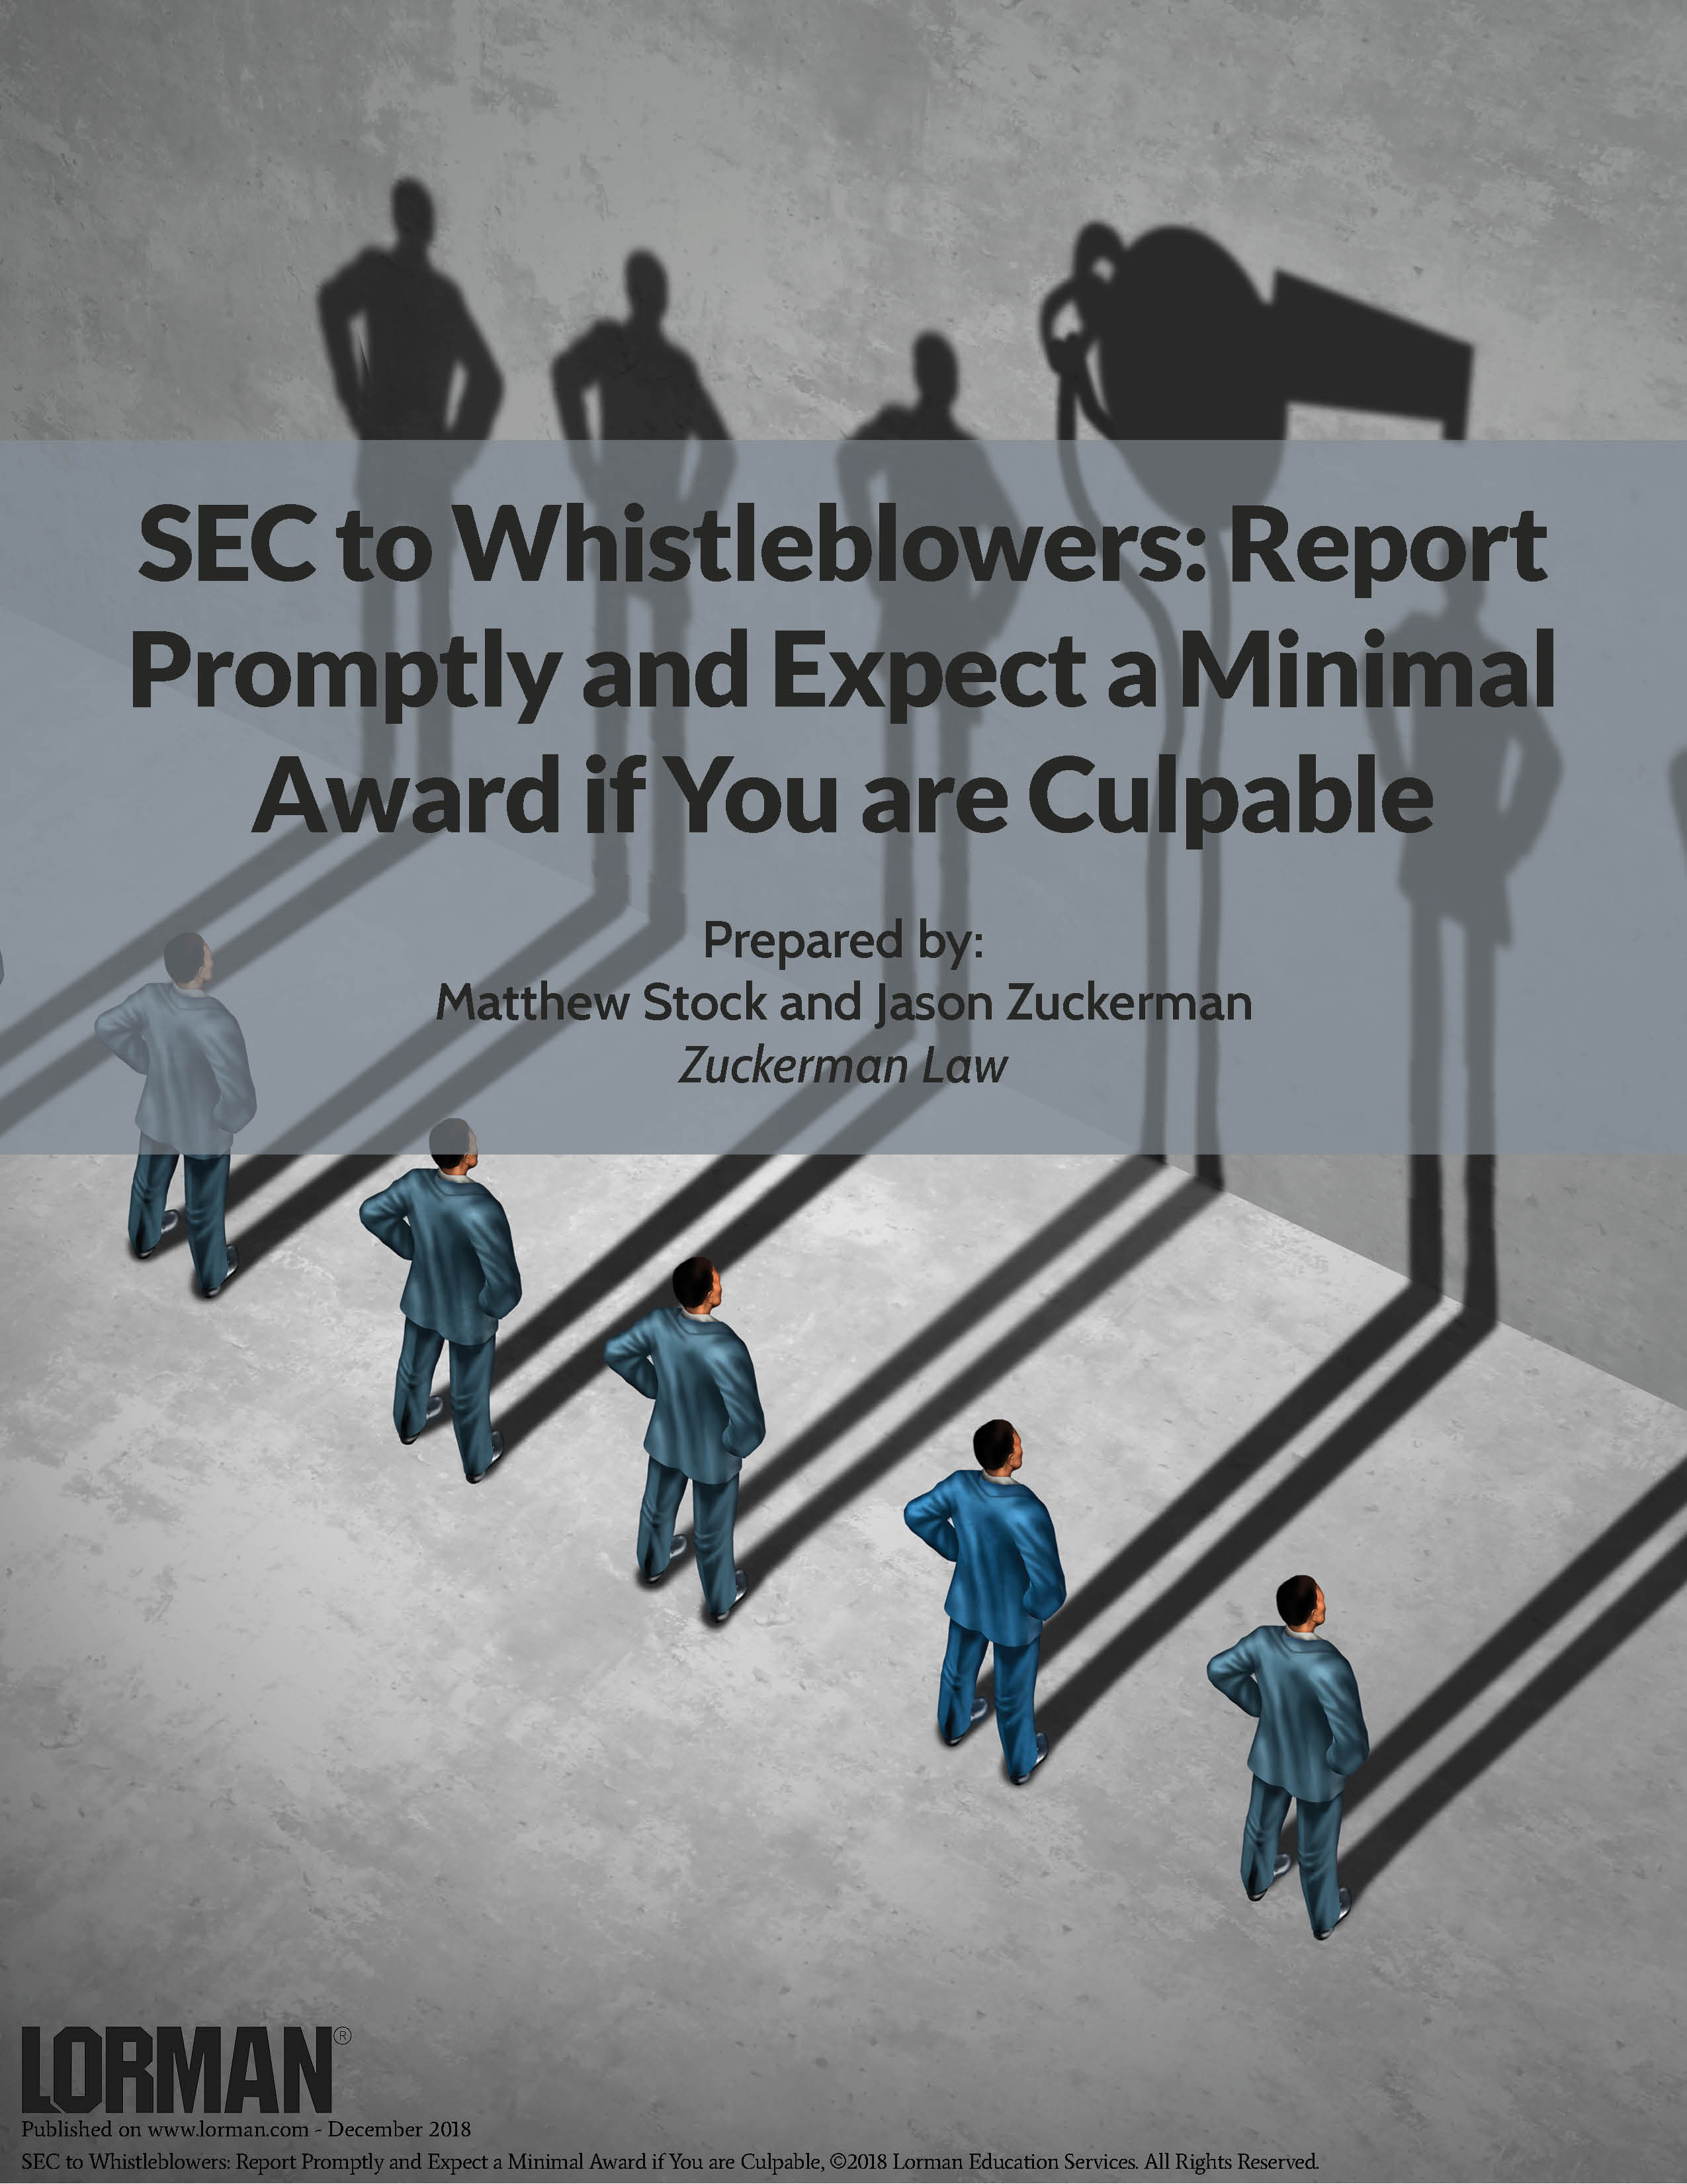 SEC to Whistleblowers: Report Promptly and Expect a Minimal Award if You are Culpable